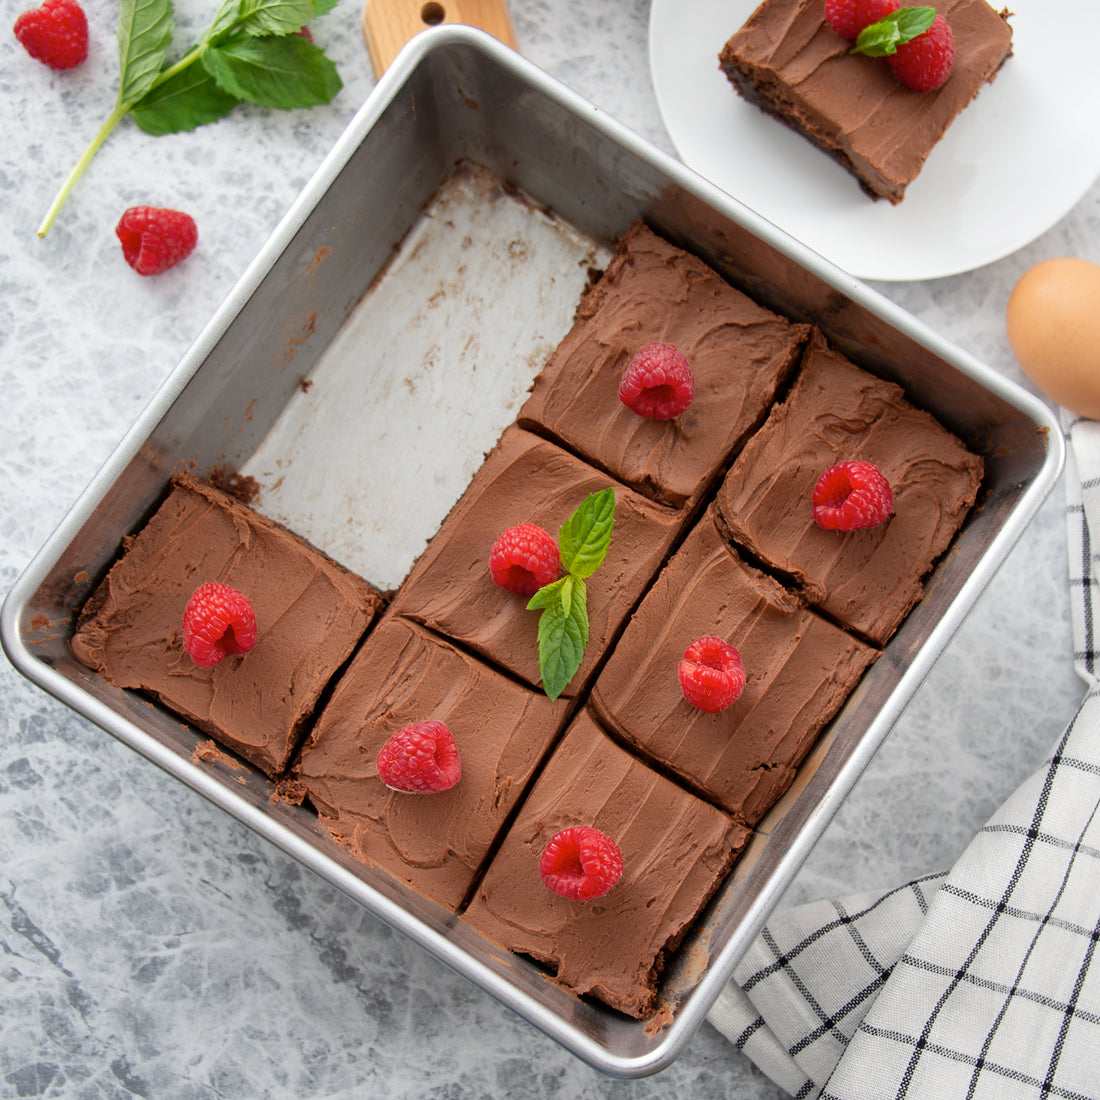 A square baking pan with frosted chocolate brownies topped with raspberries. White serving plate.